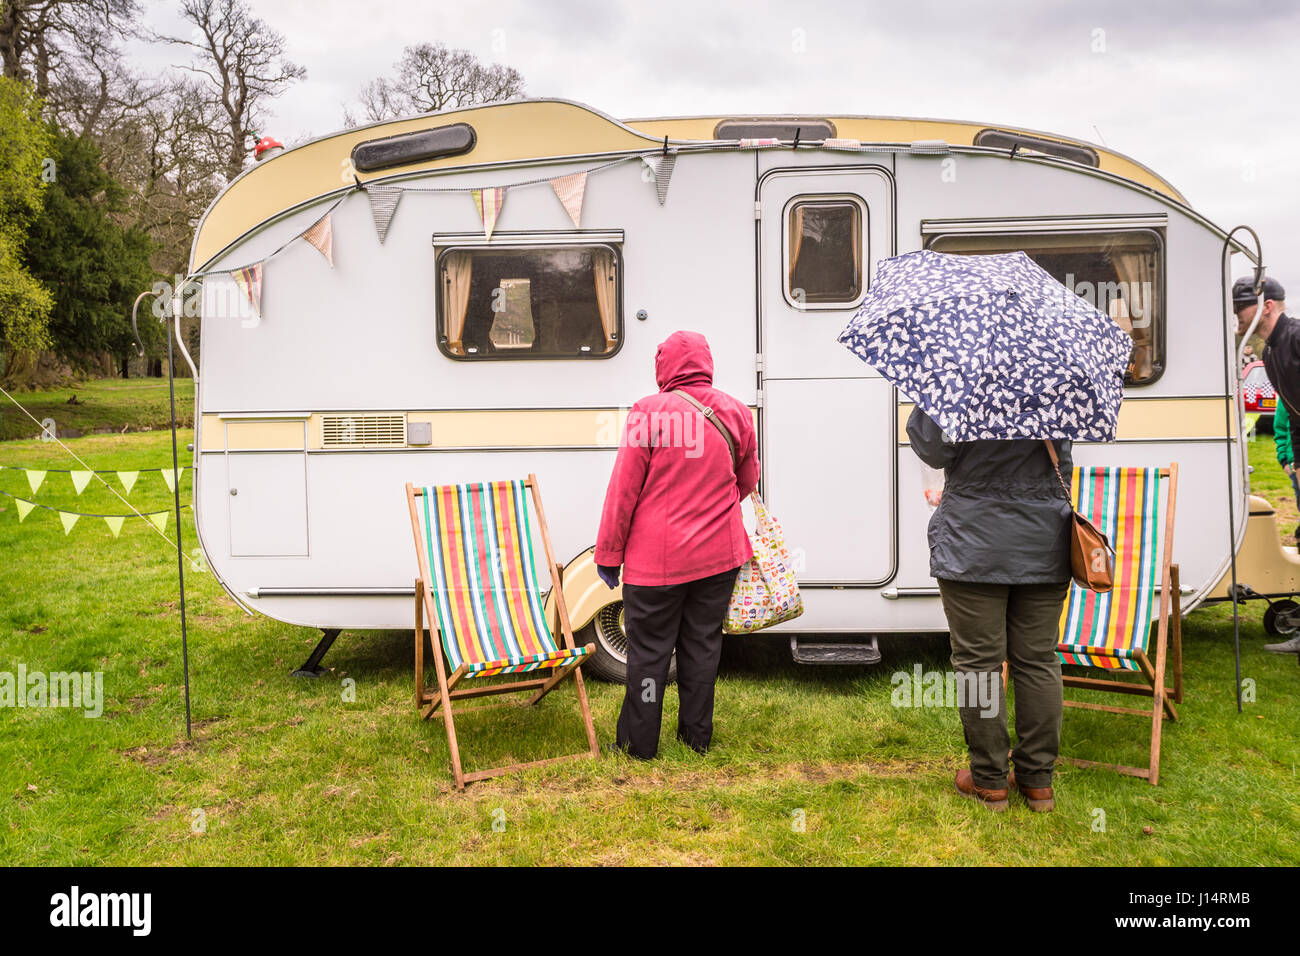 Typical old caravan or caravans in a park, Britain, in spring holiday wet weather Stock Photo